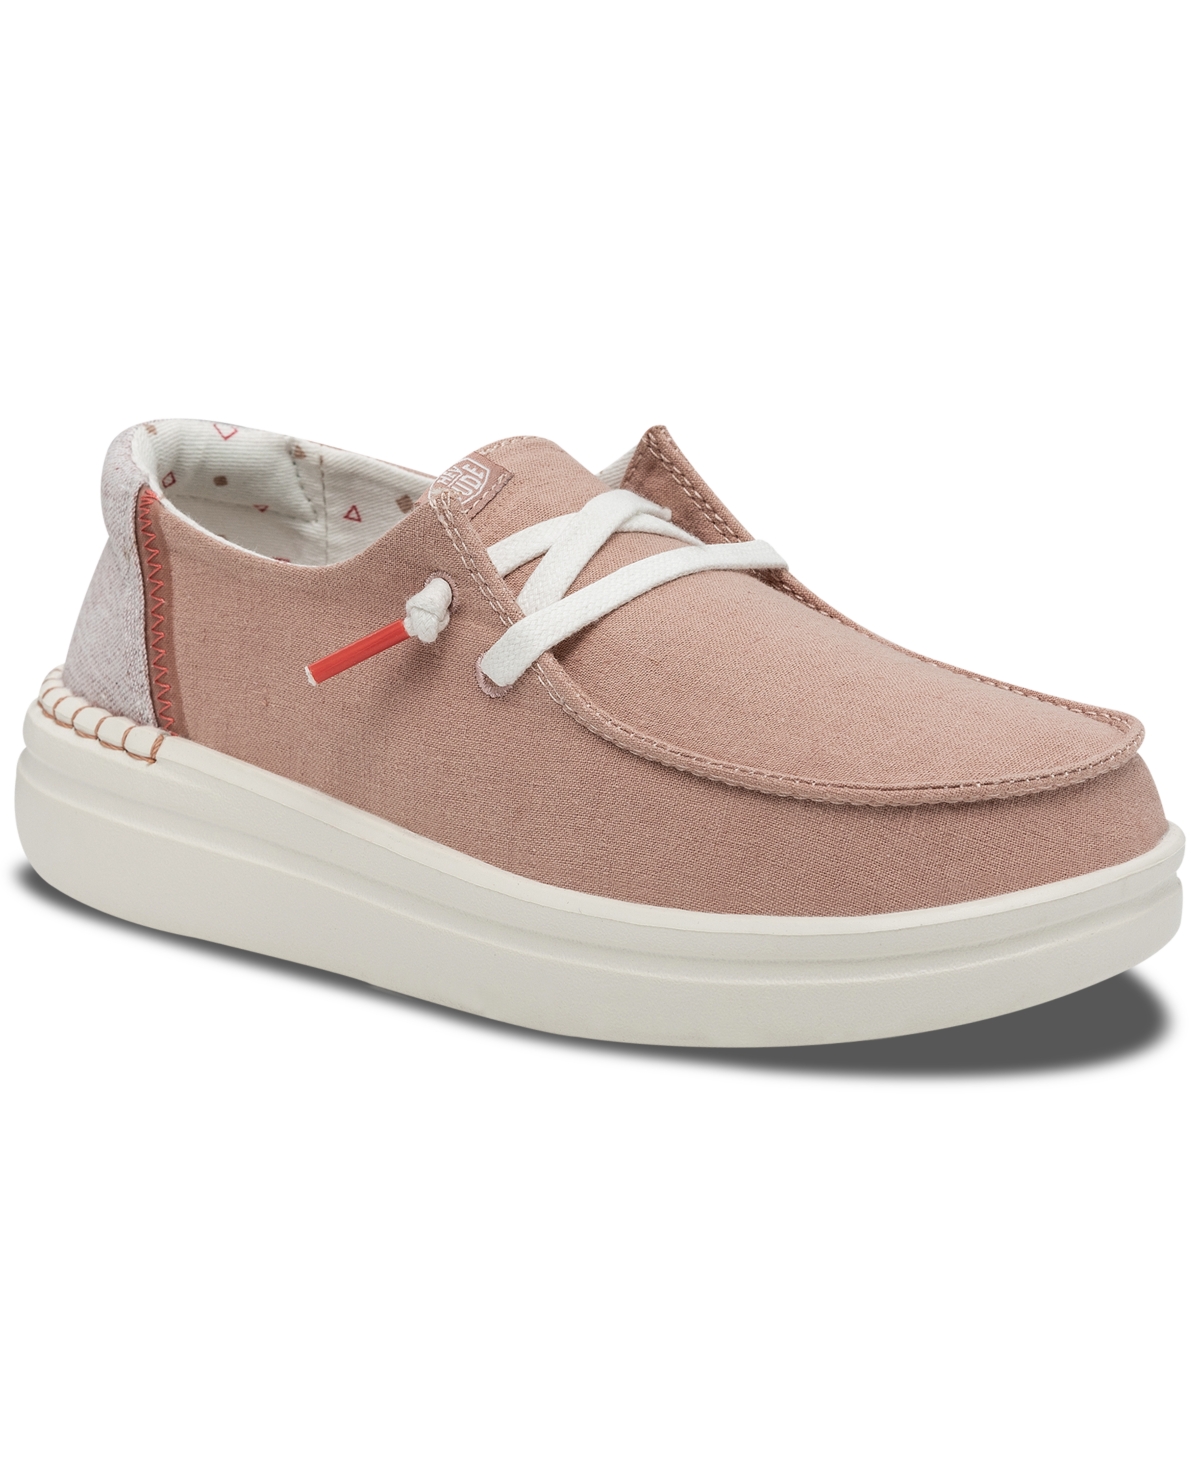 HEY DUDE WOMEN'S WENDY RISE CASUAL MOCCASIN SNEAKERS FROM FINISH LINE